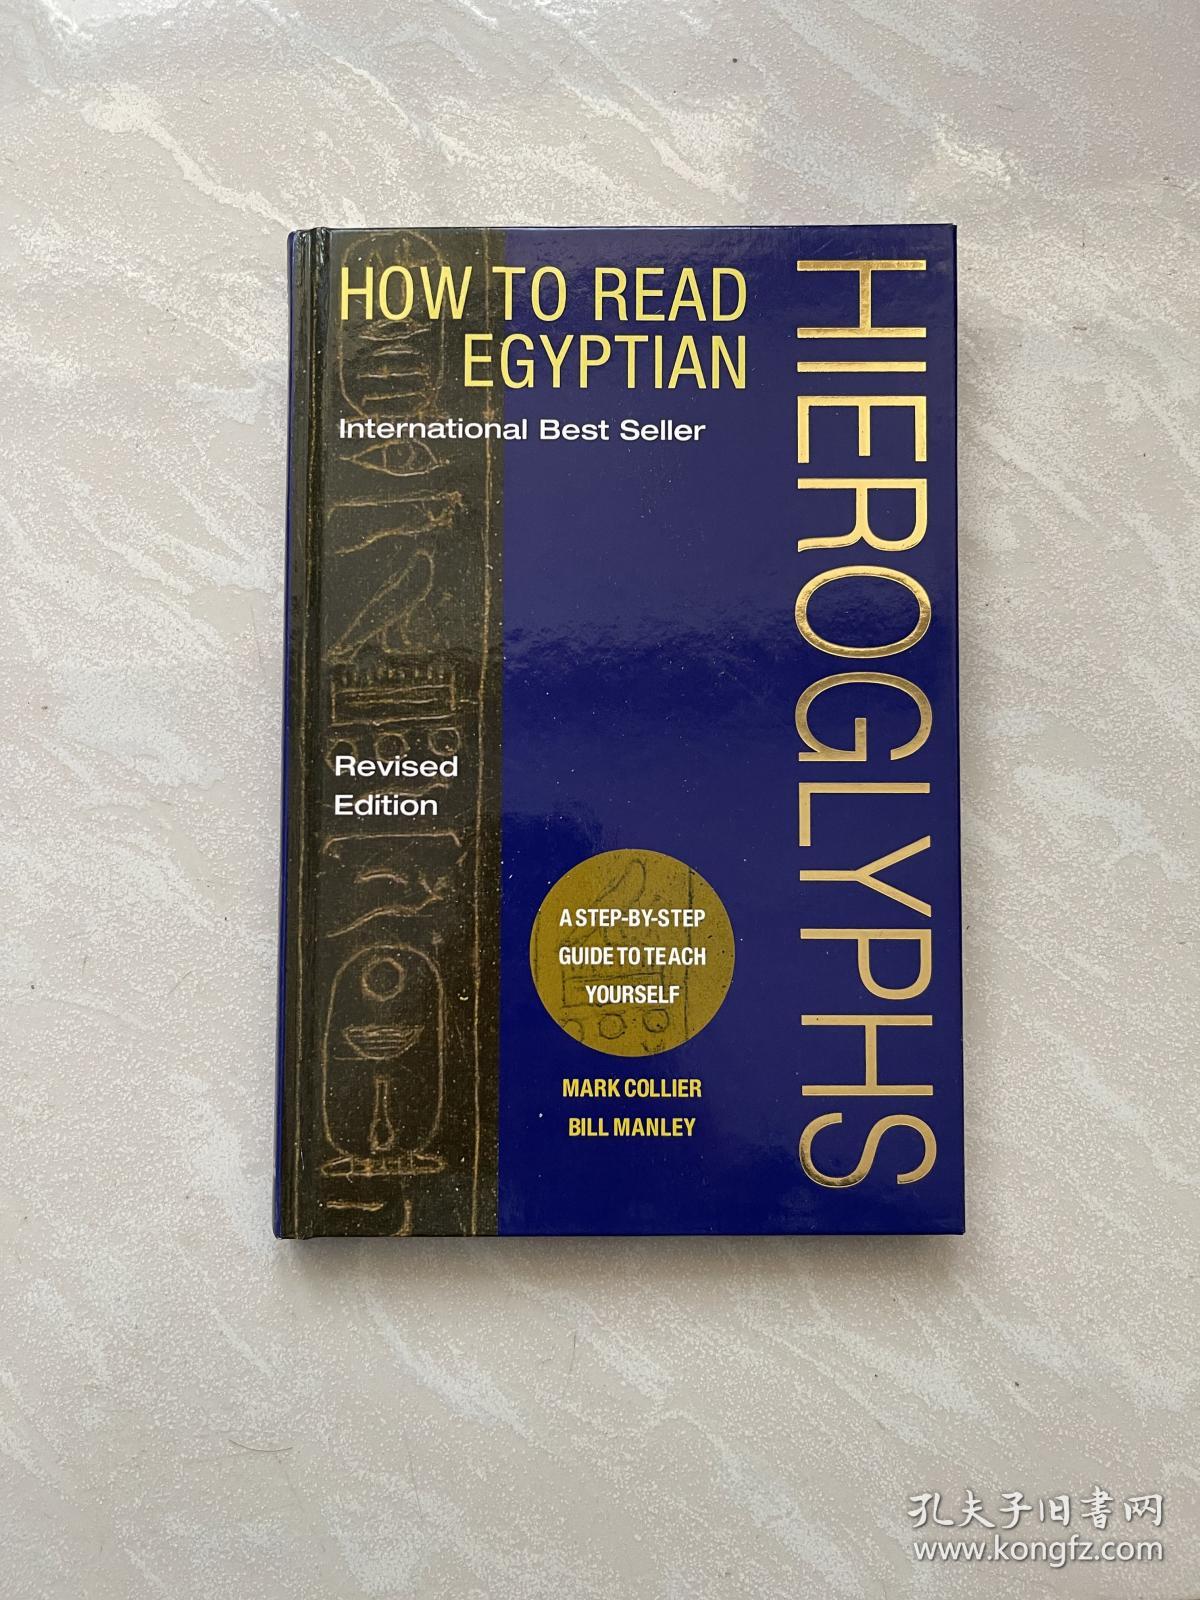 HOW TO READ EGYPTIAN